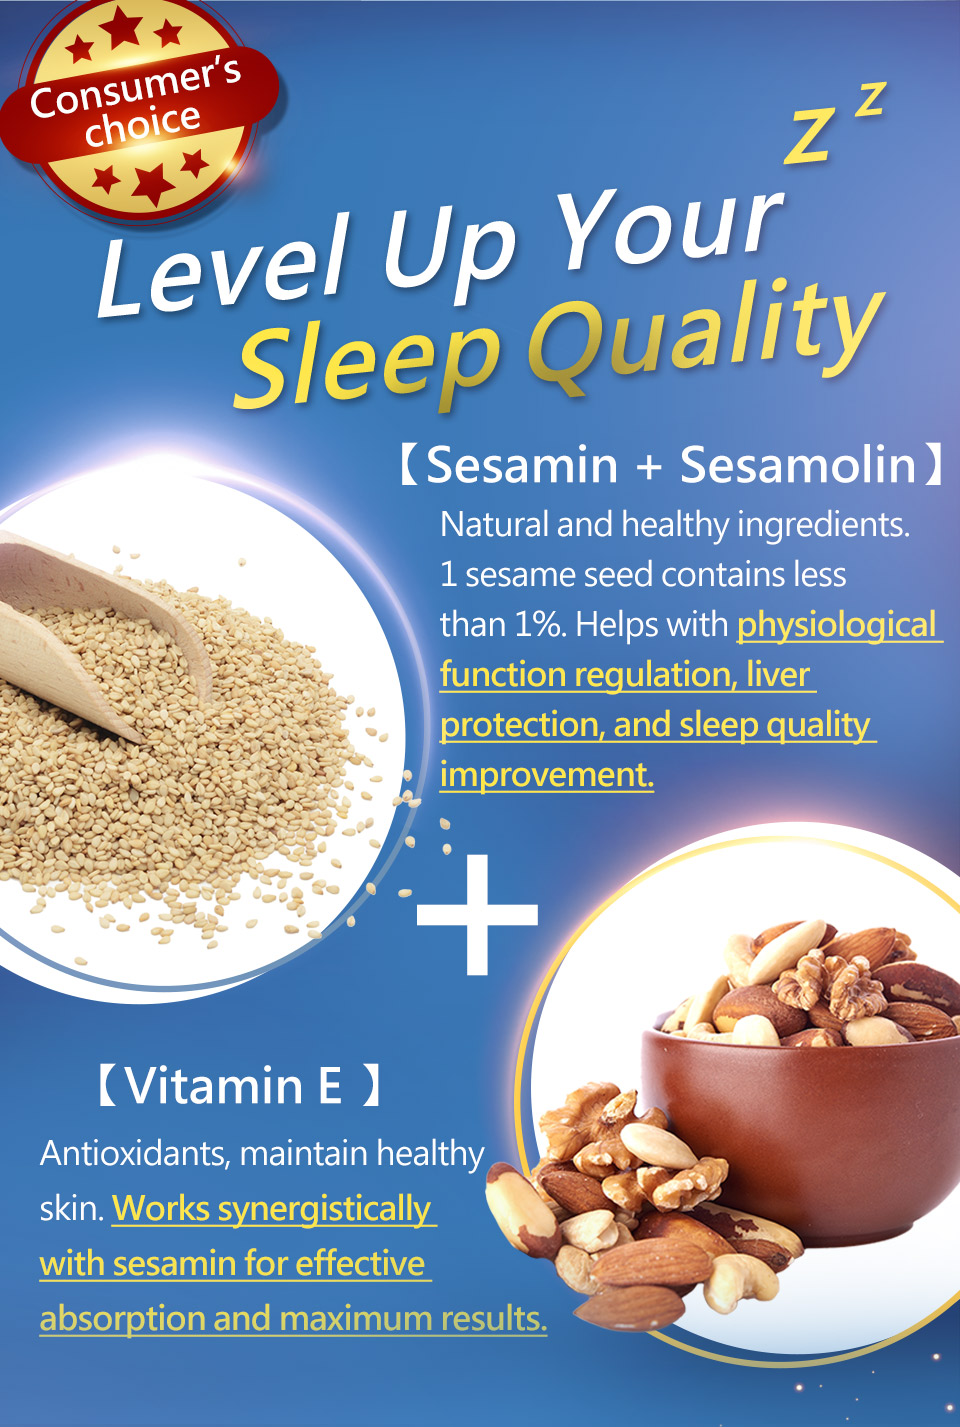 Sesamin helps with body and mind relaxation, relieve fatigue.